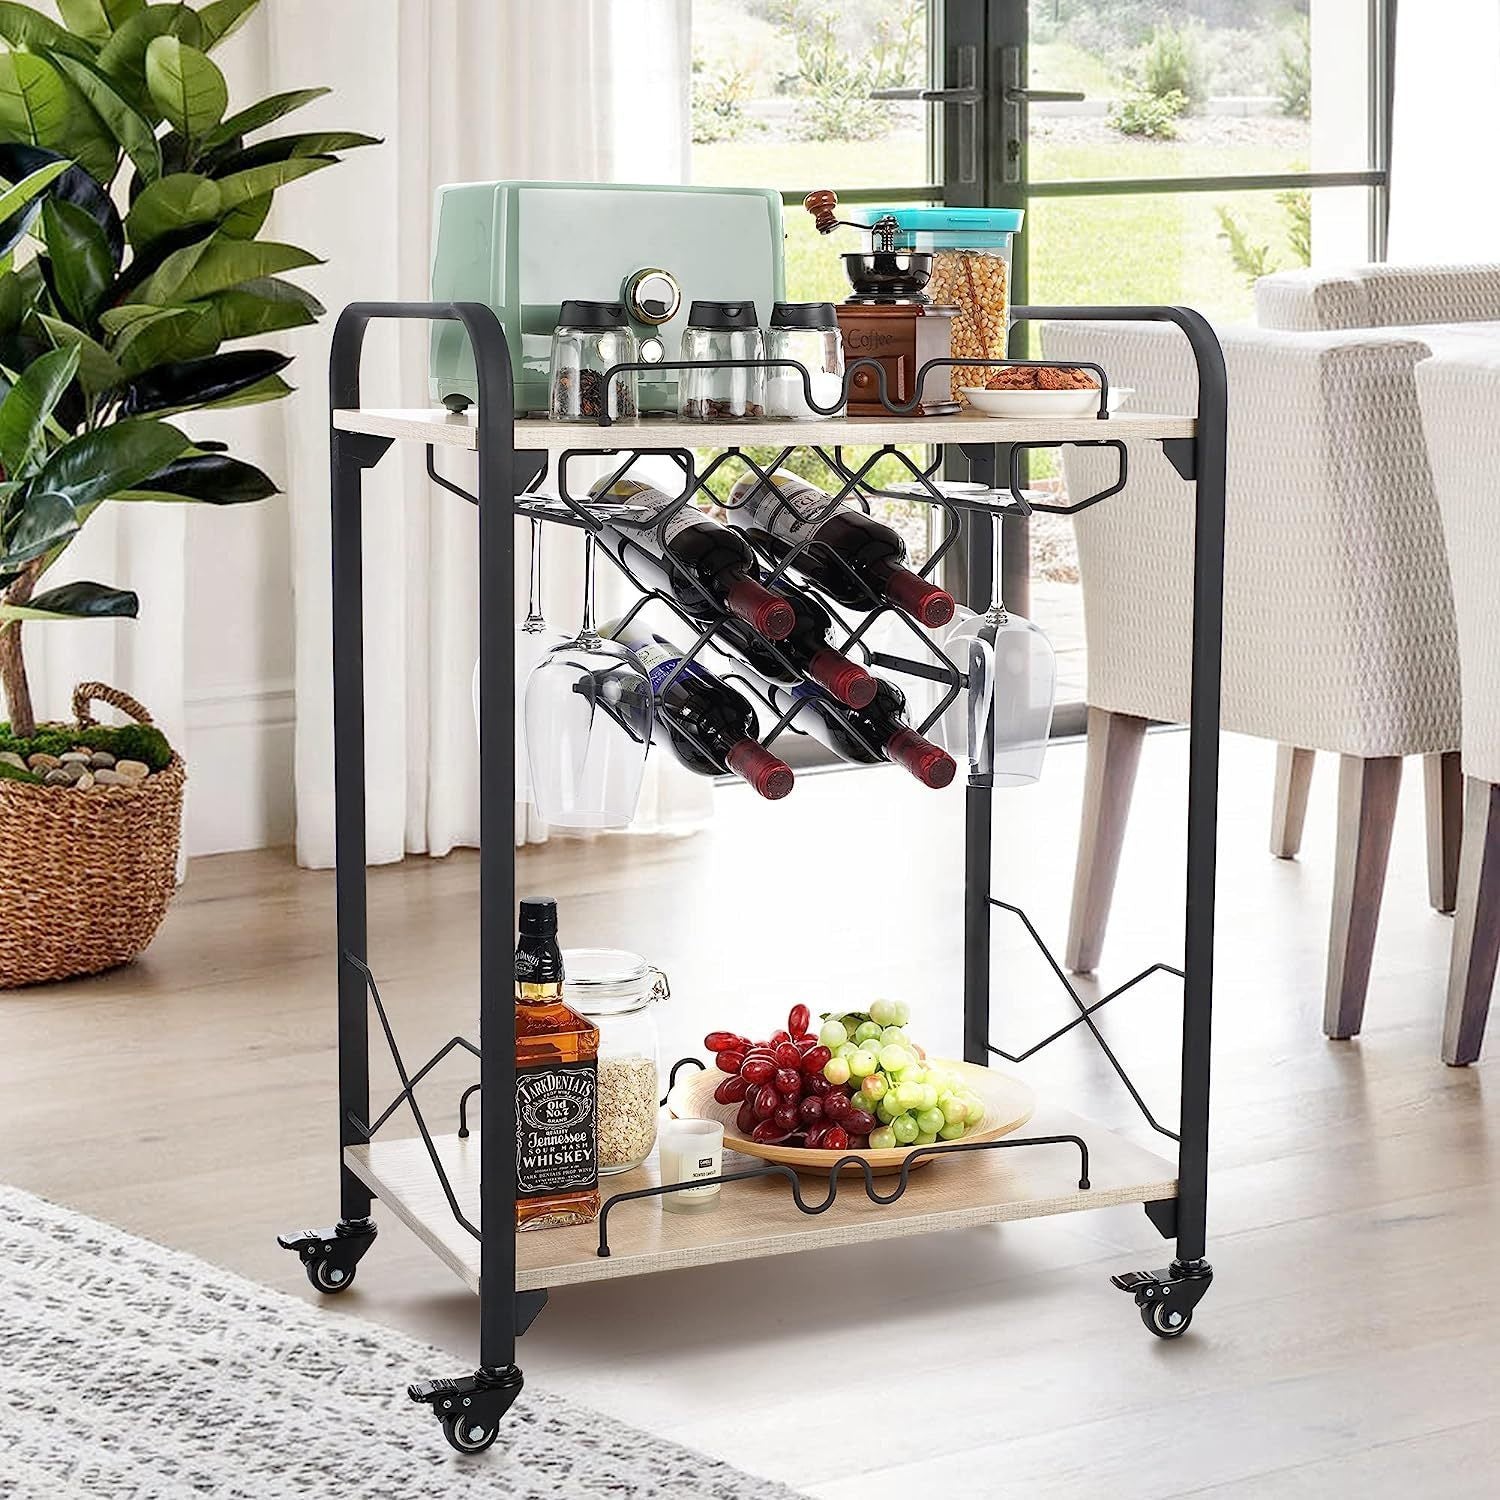 Bar-Carts-for-The-Home,-2-Tier-Mobile-Bar-Serving-Cart-with-Wine-Racks-and-Glasses-Holders,-Wine-Cart-on-Wheels-Bar-Carts-and-Servers